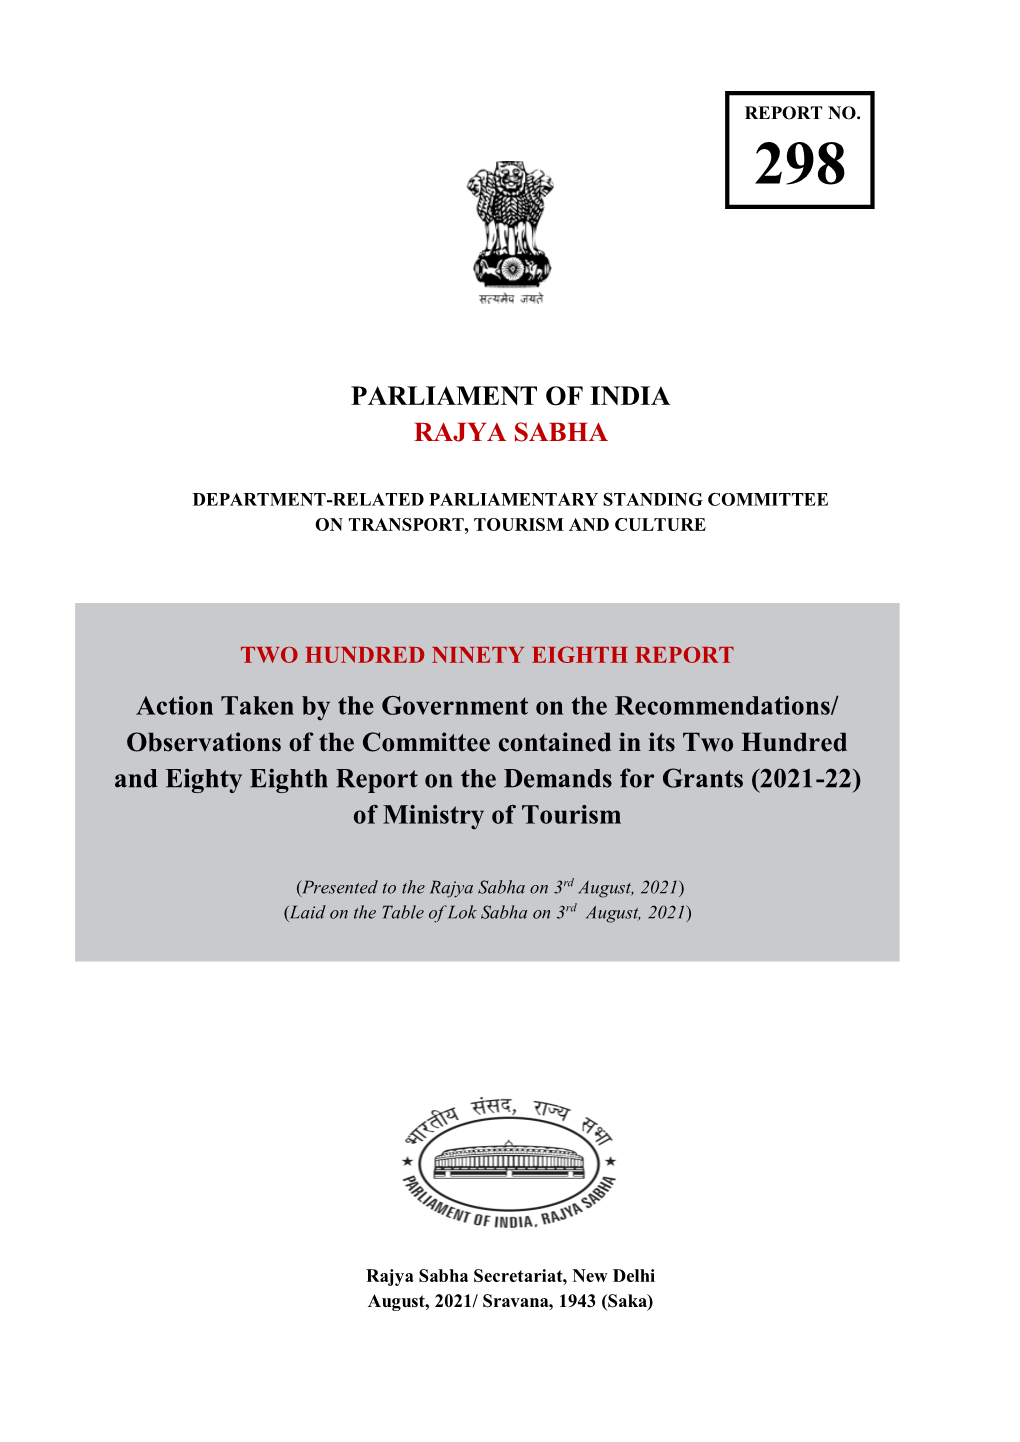 Observations of the Committee Contained in Its Two Hundred and Eighty Eighth Report on the Demands for Grants (2021-22) of Ministry of Tourism